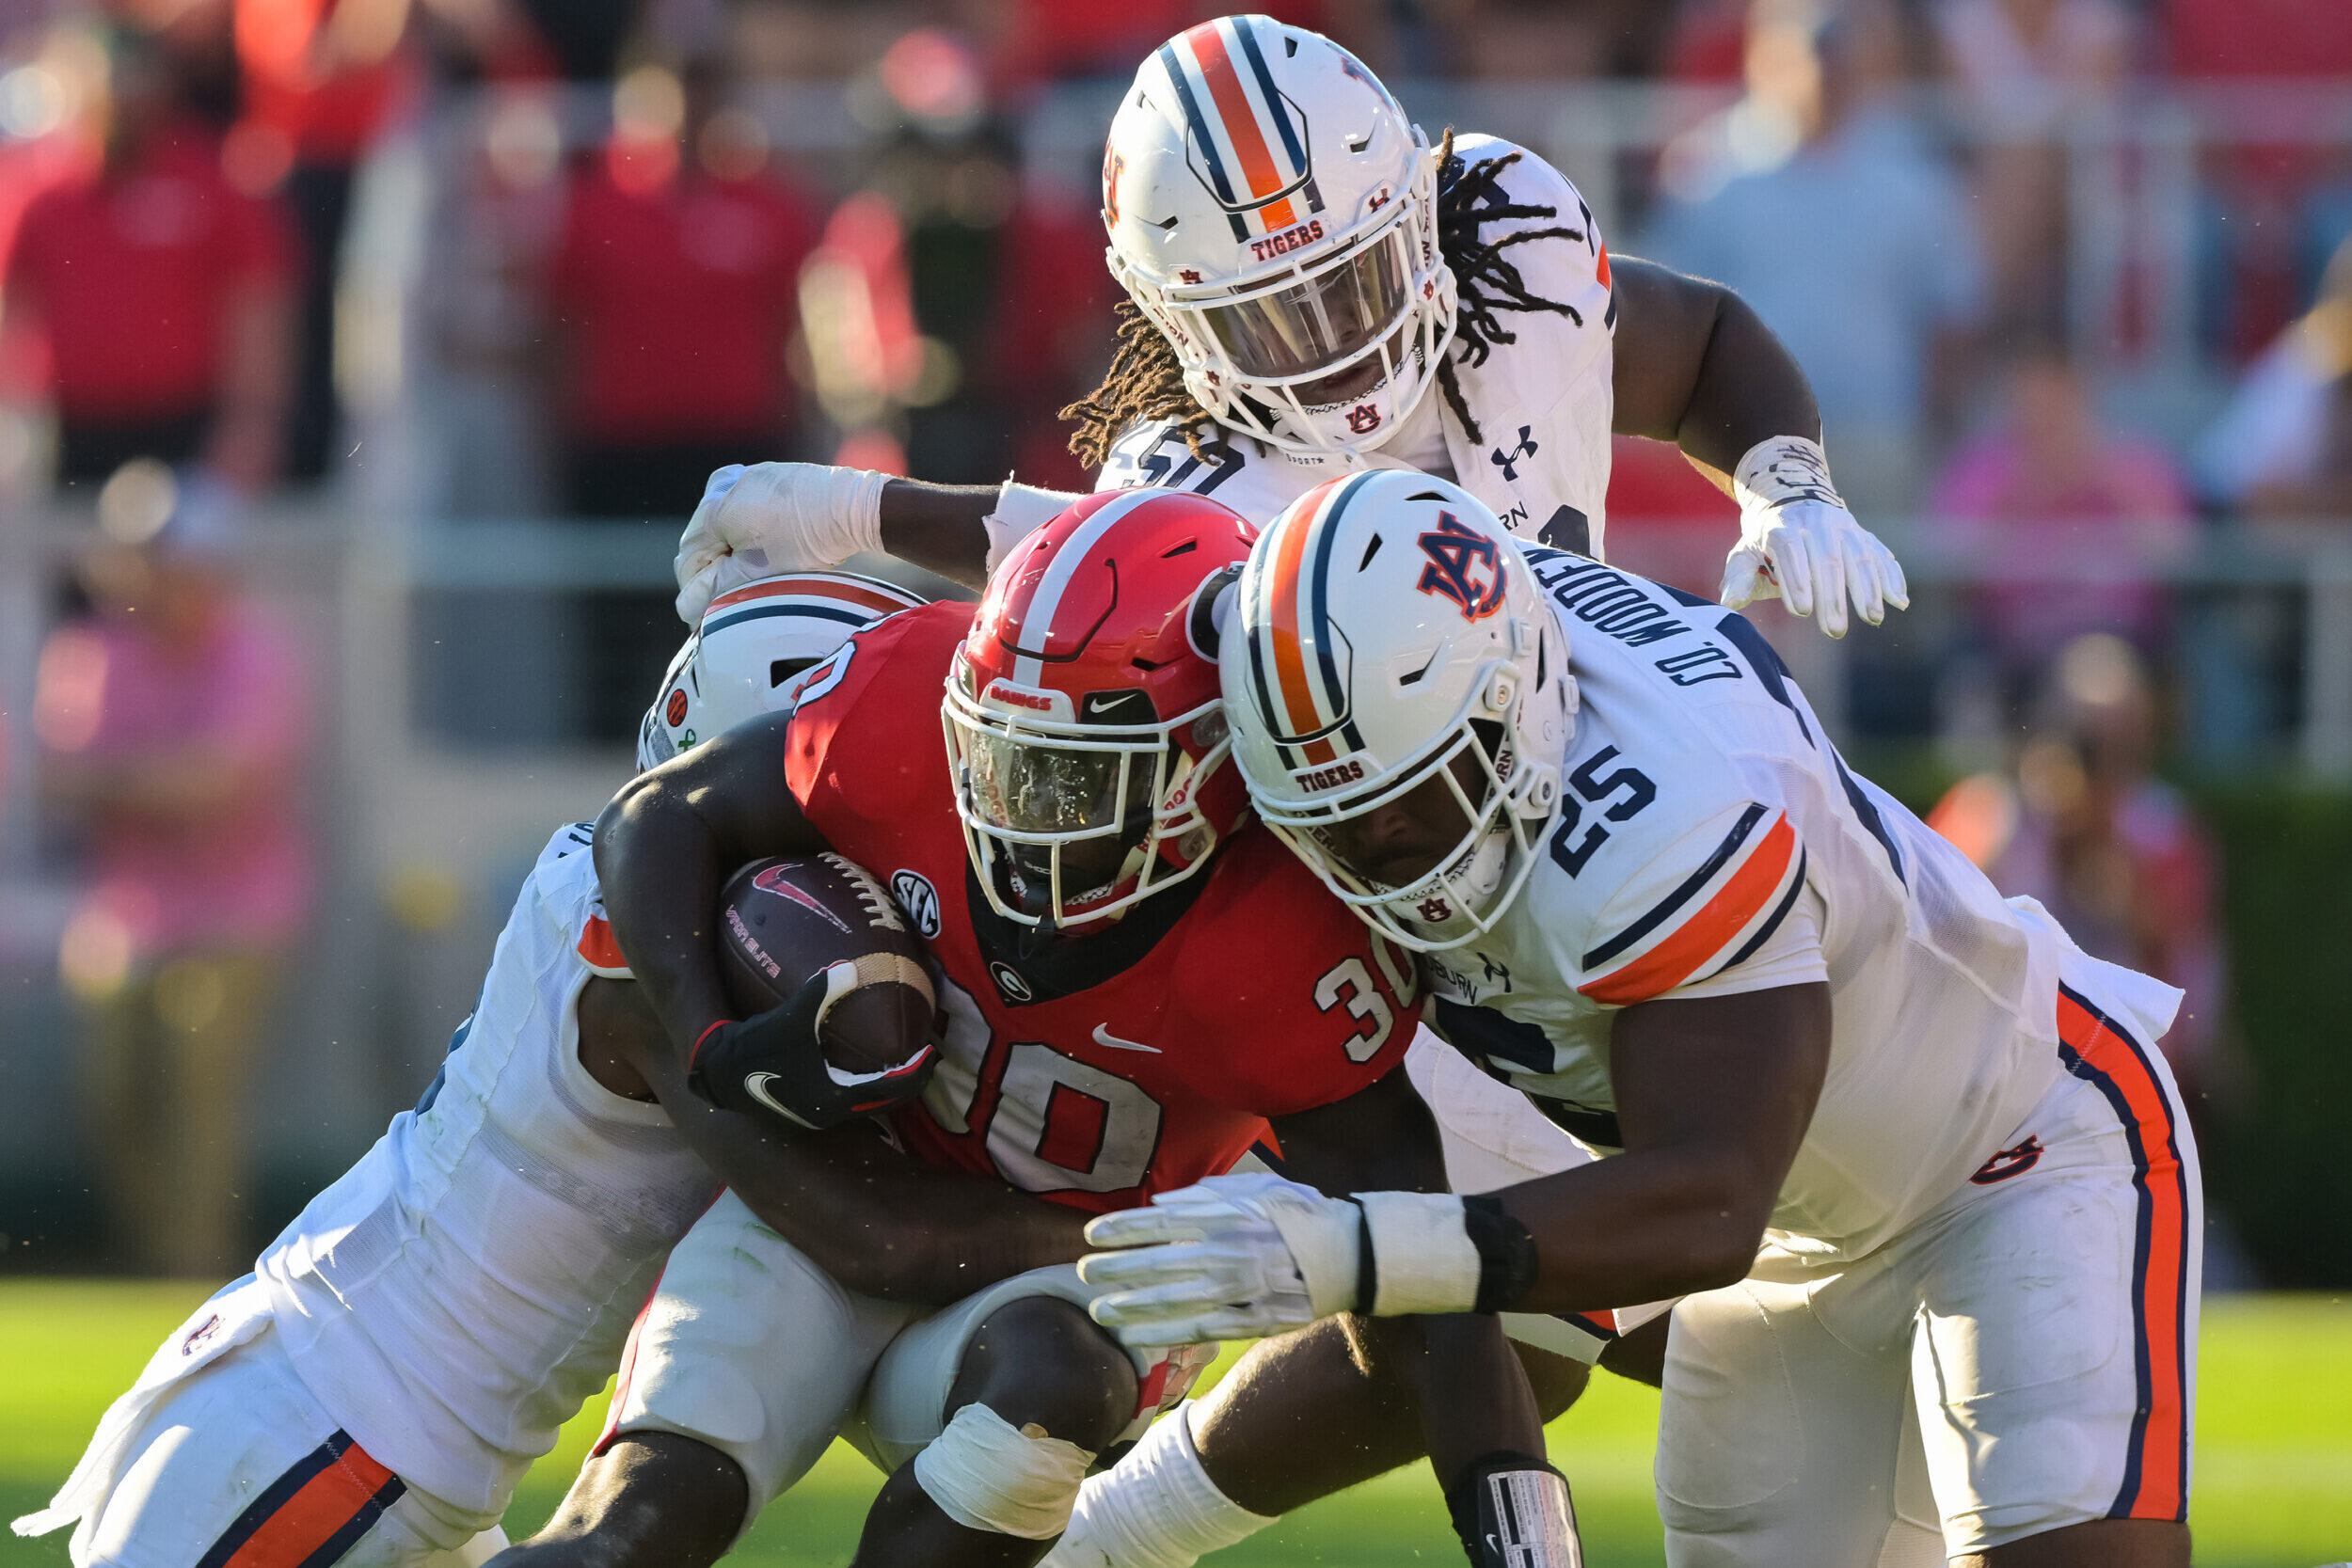 Athens, GA, USA; Colby Wooden (25) tackles Georgia offense during the game between Auburn and Georgia at Sanford Stadium.